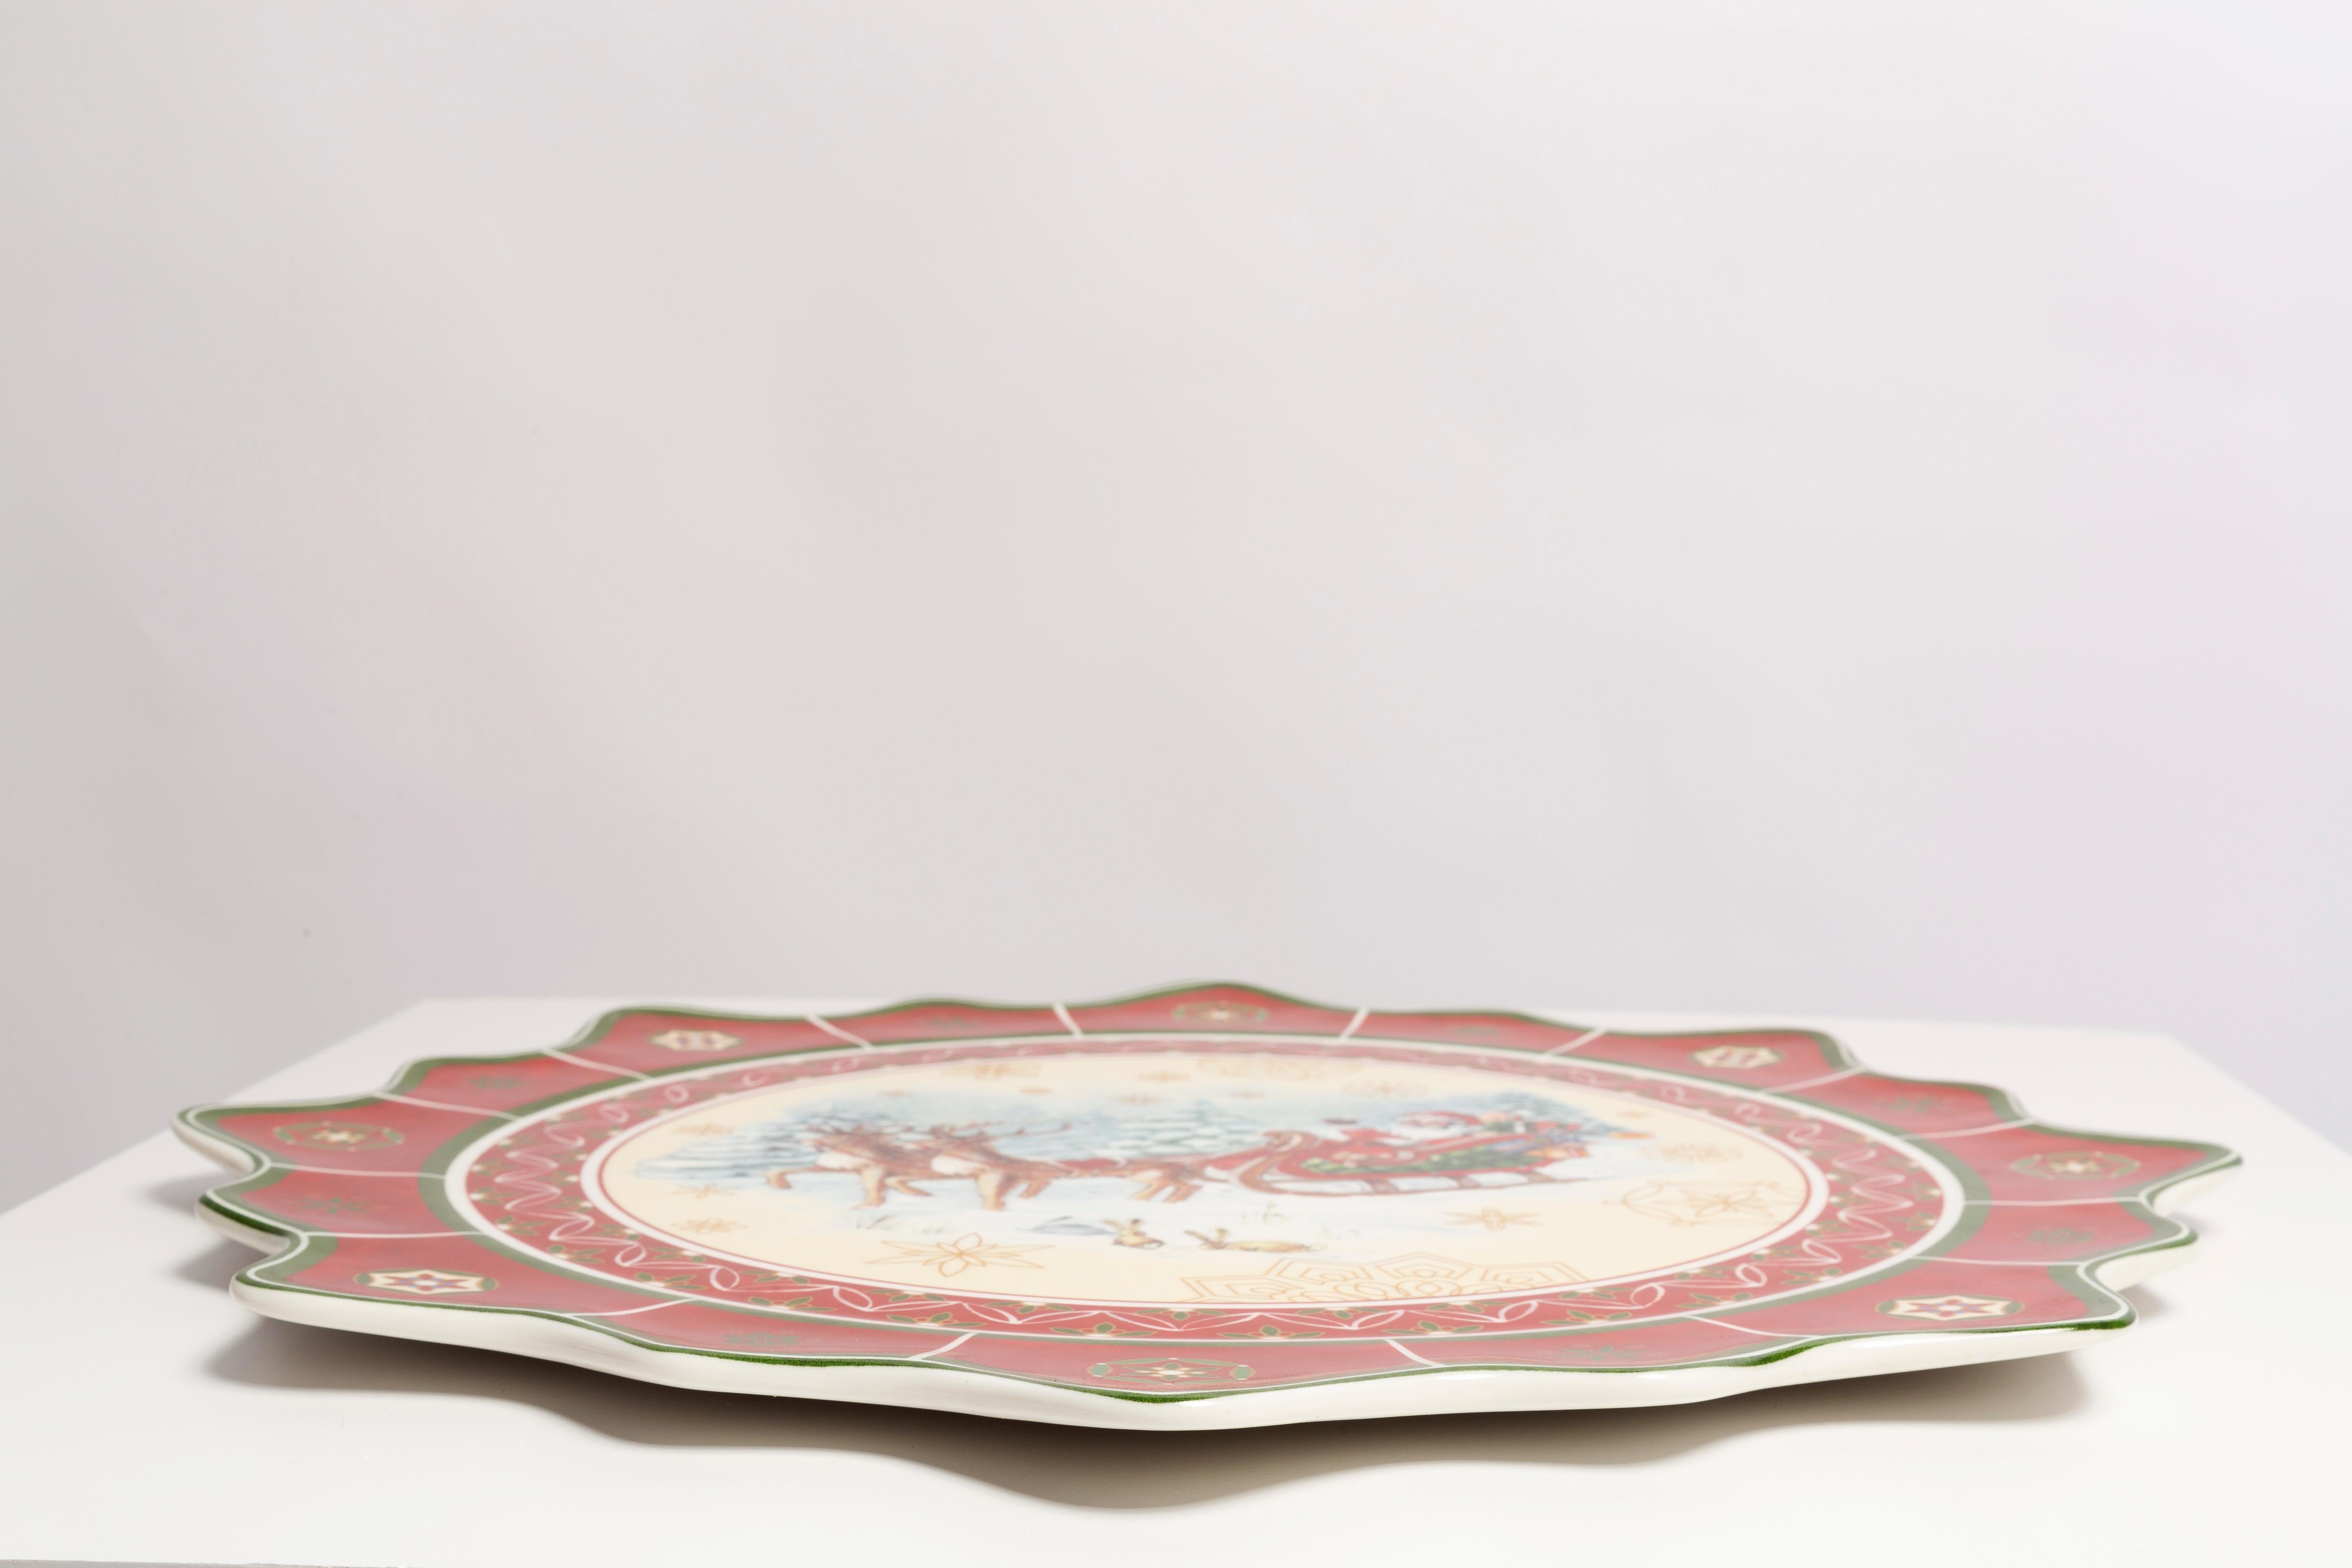 20th Century Christimas Decorative Painted Ceramic Plate, Villeroy Boch, France, 2000s For Sale